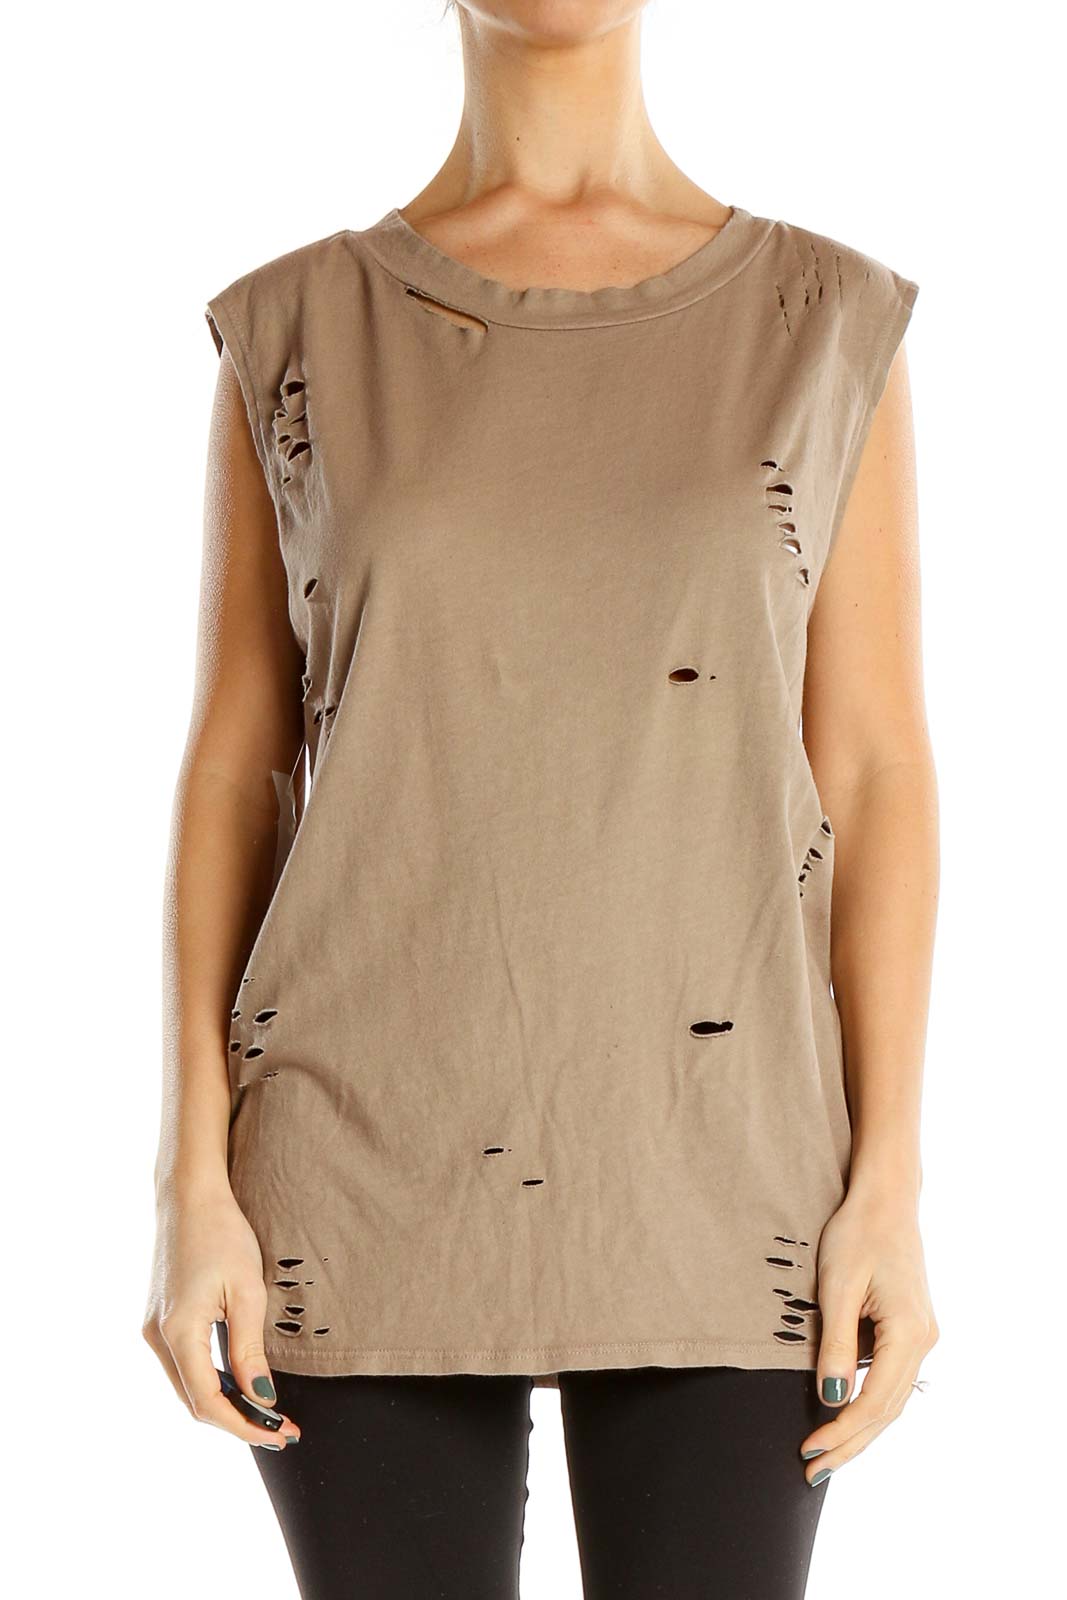 Brown Distressed Casual Top Front